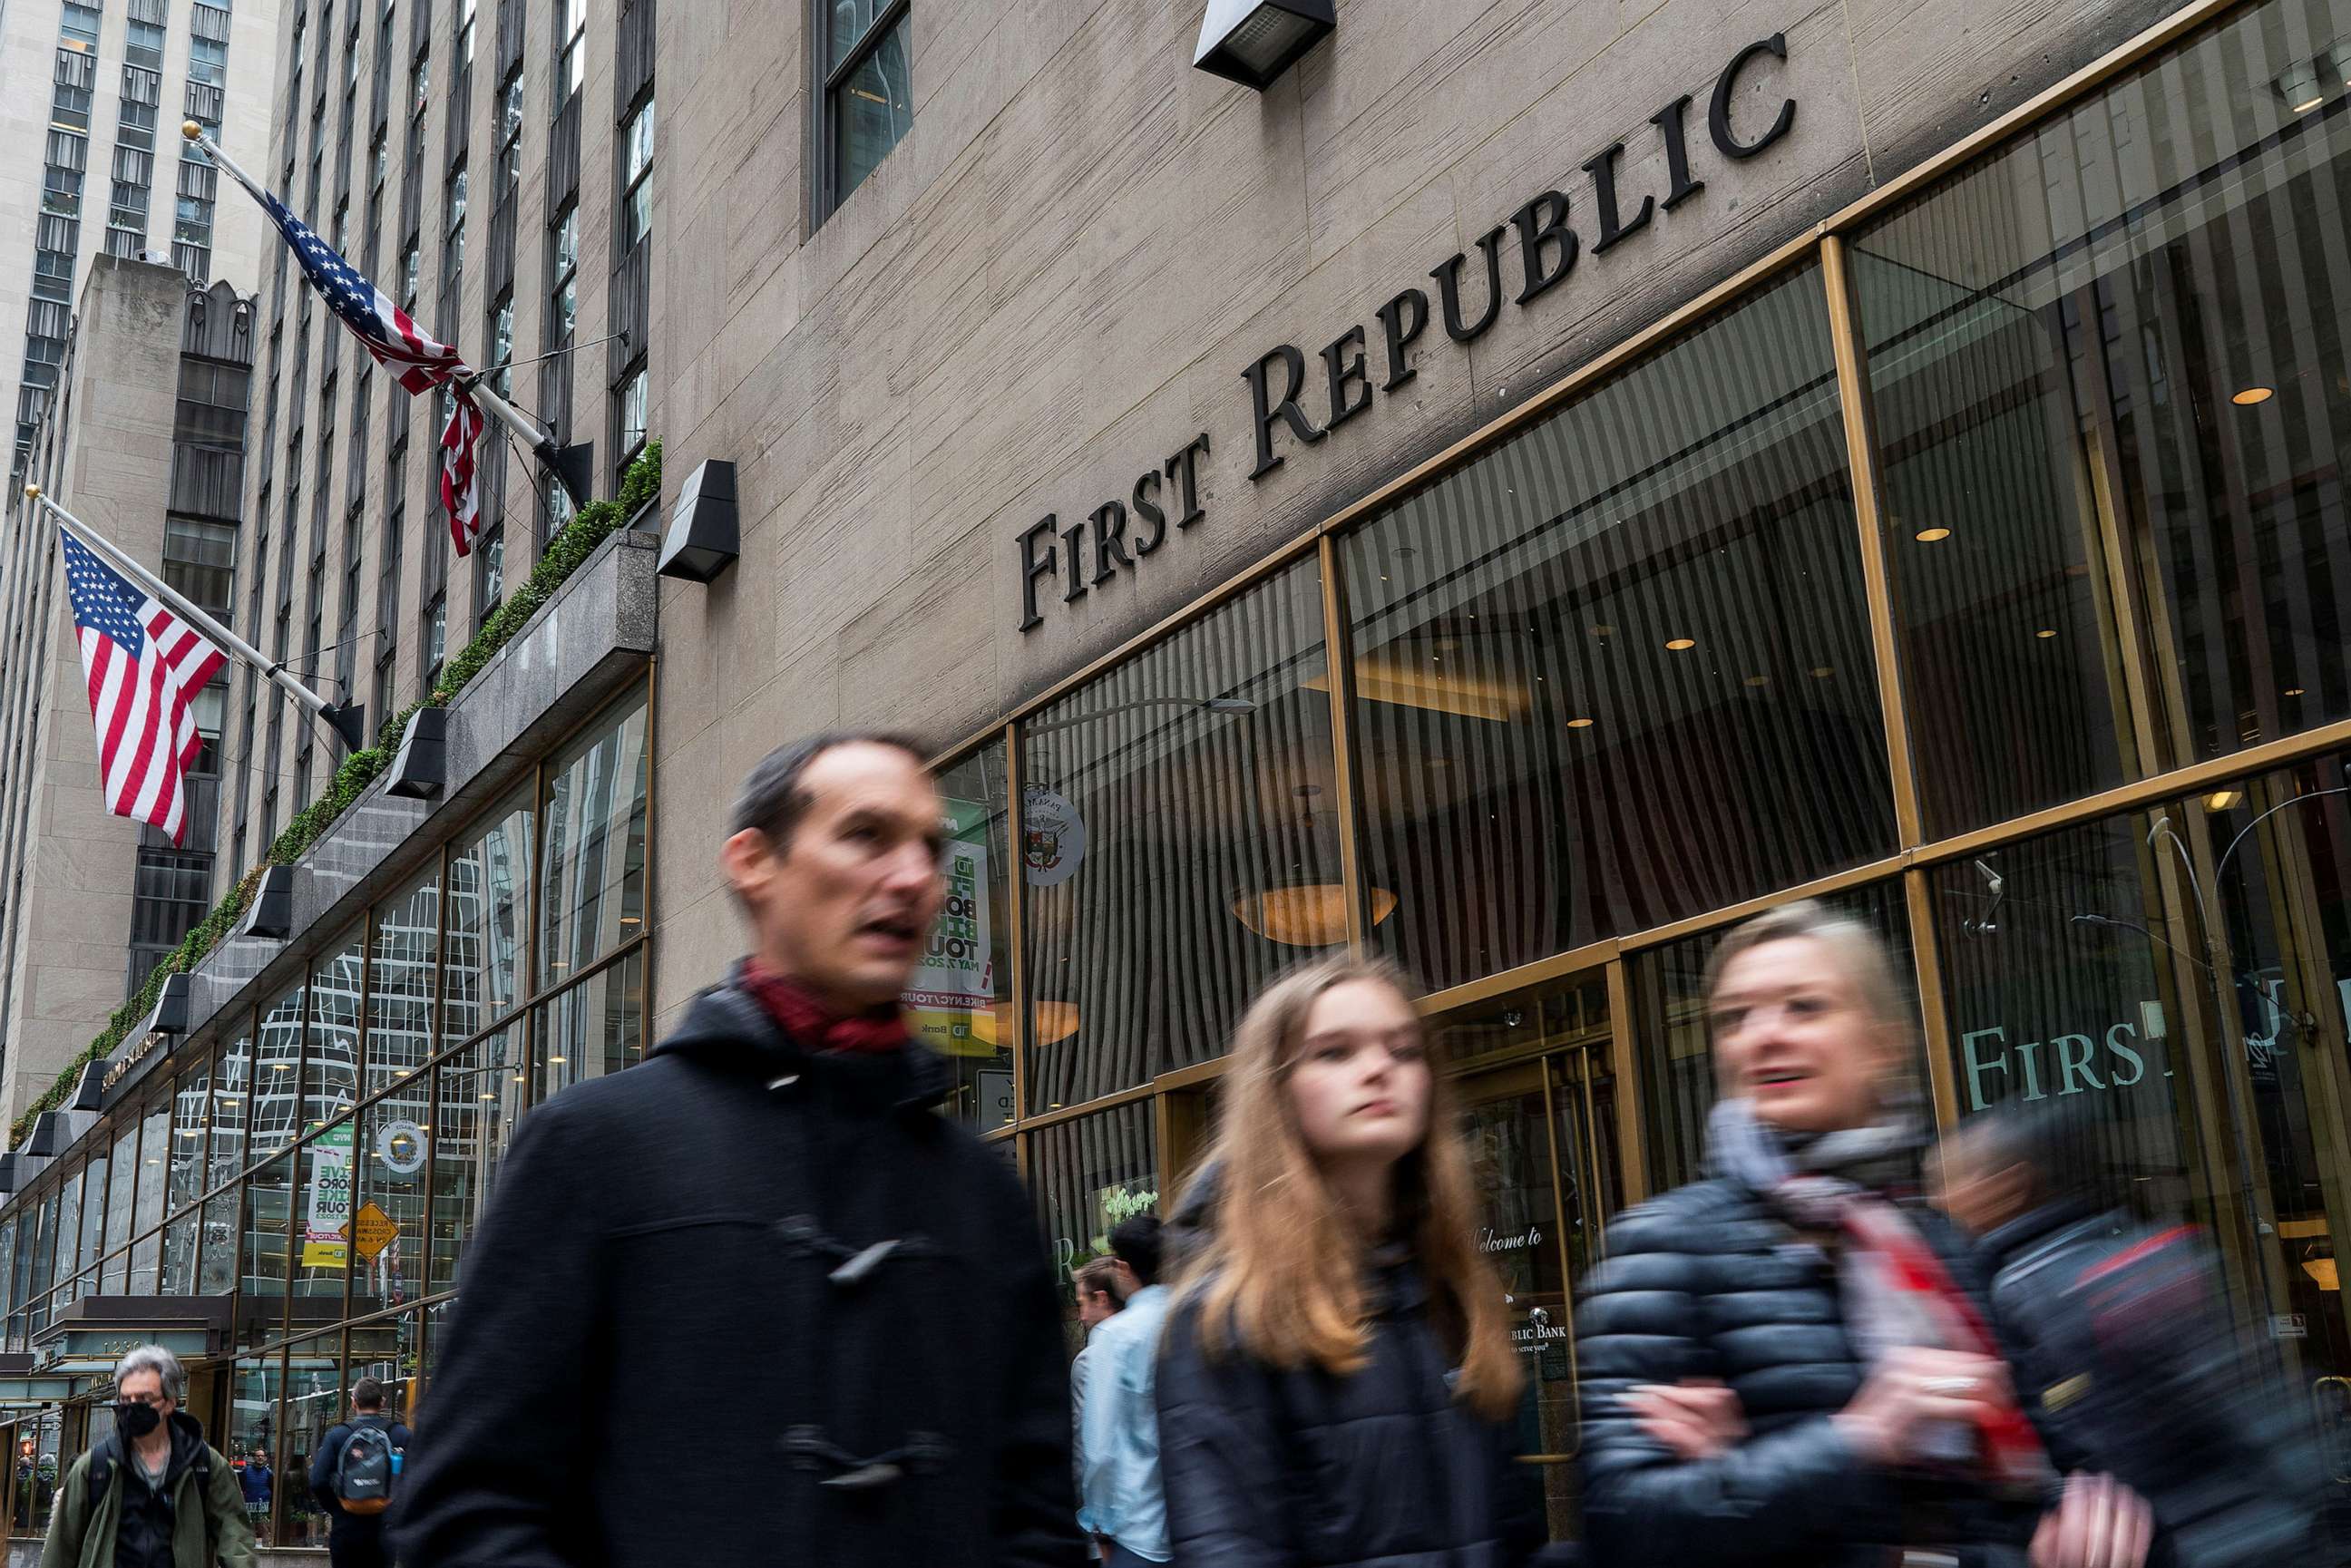 PHOTO: People walk near one of the First Republic Bank branches in New York, April 28, 2023.